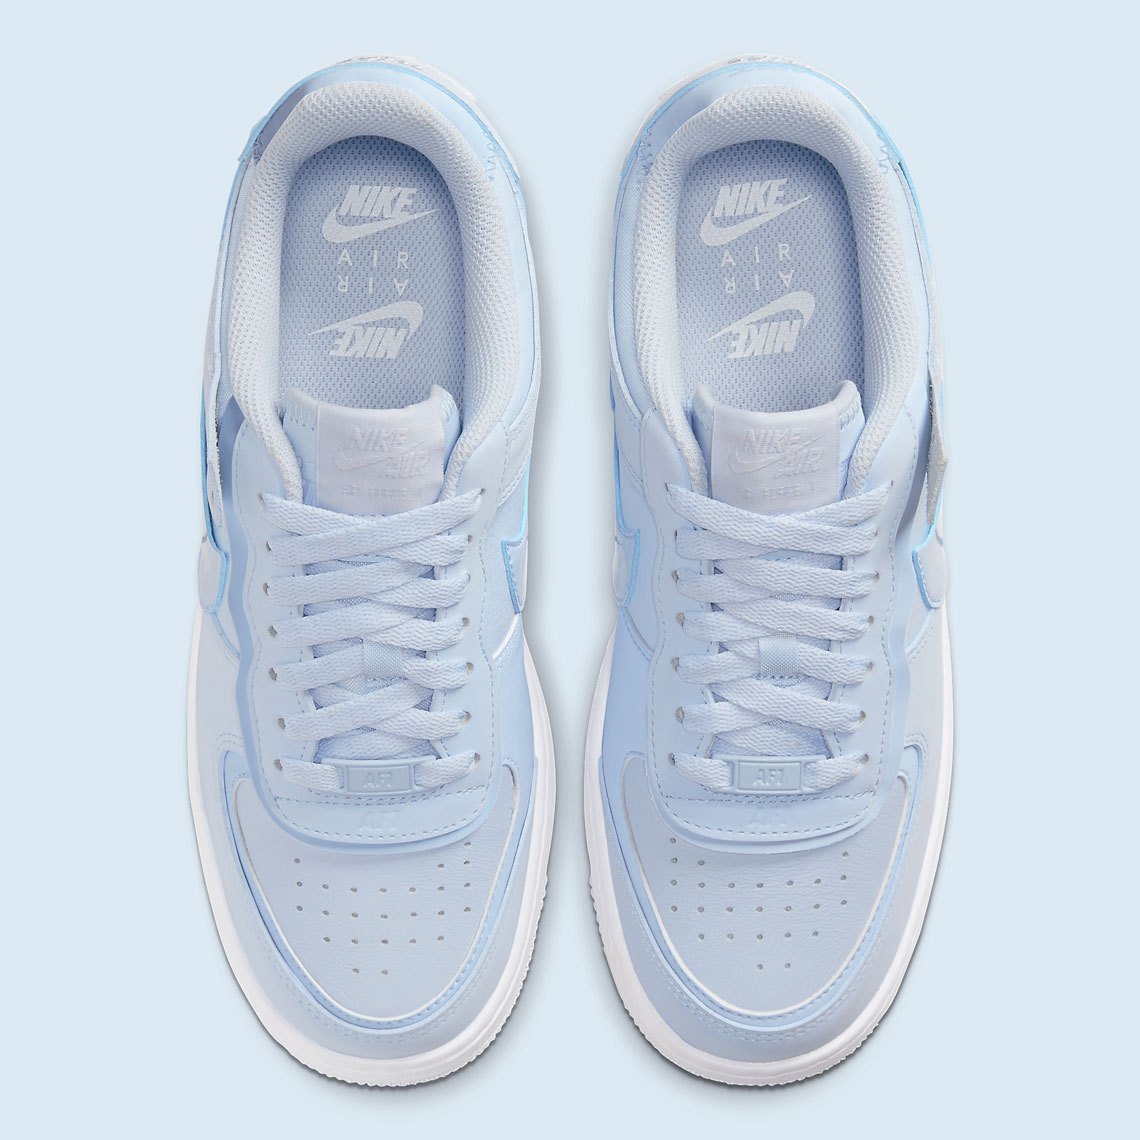 Feeling Blue? Make It Fashion With The New Nike Air Force 1 Shadow Colourway